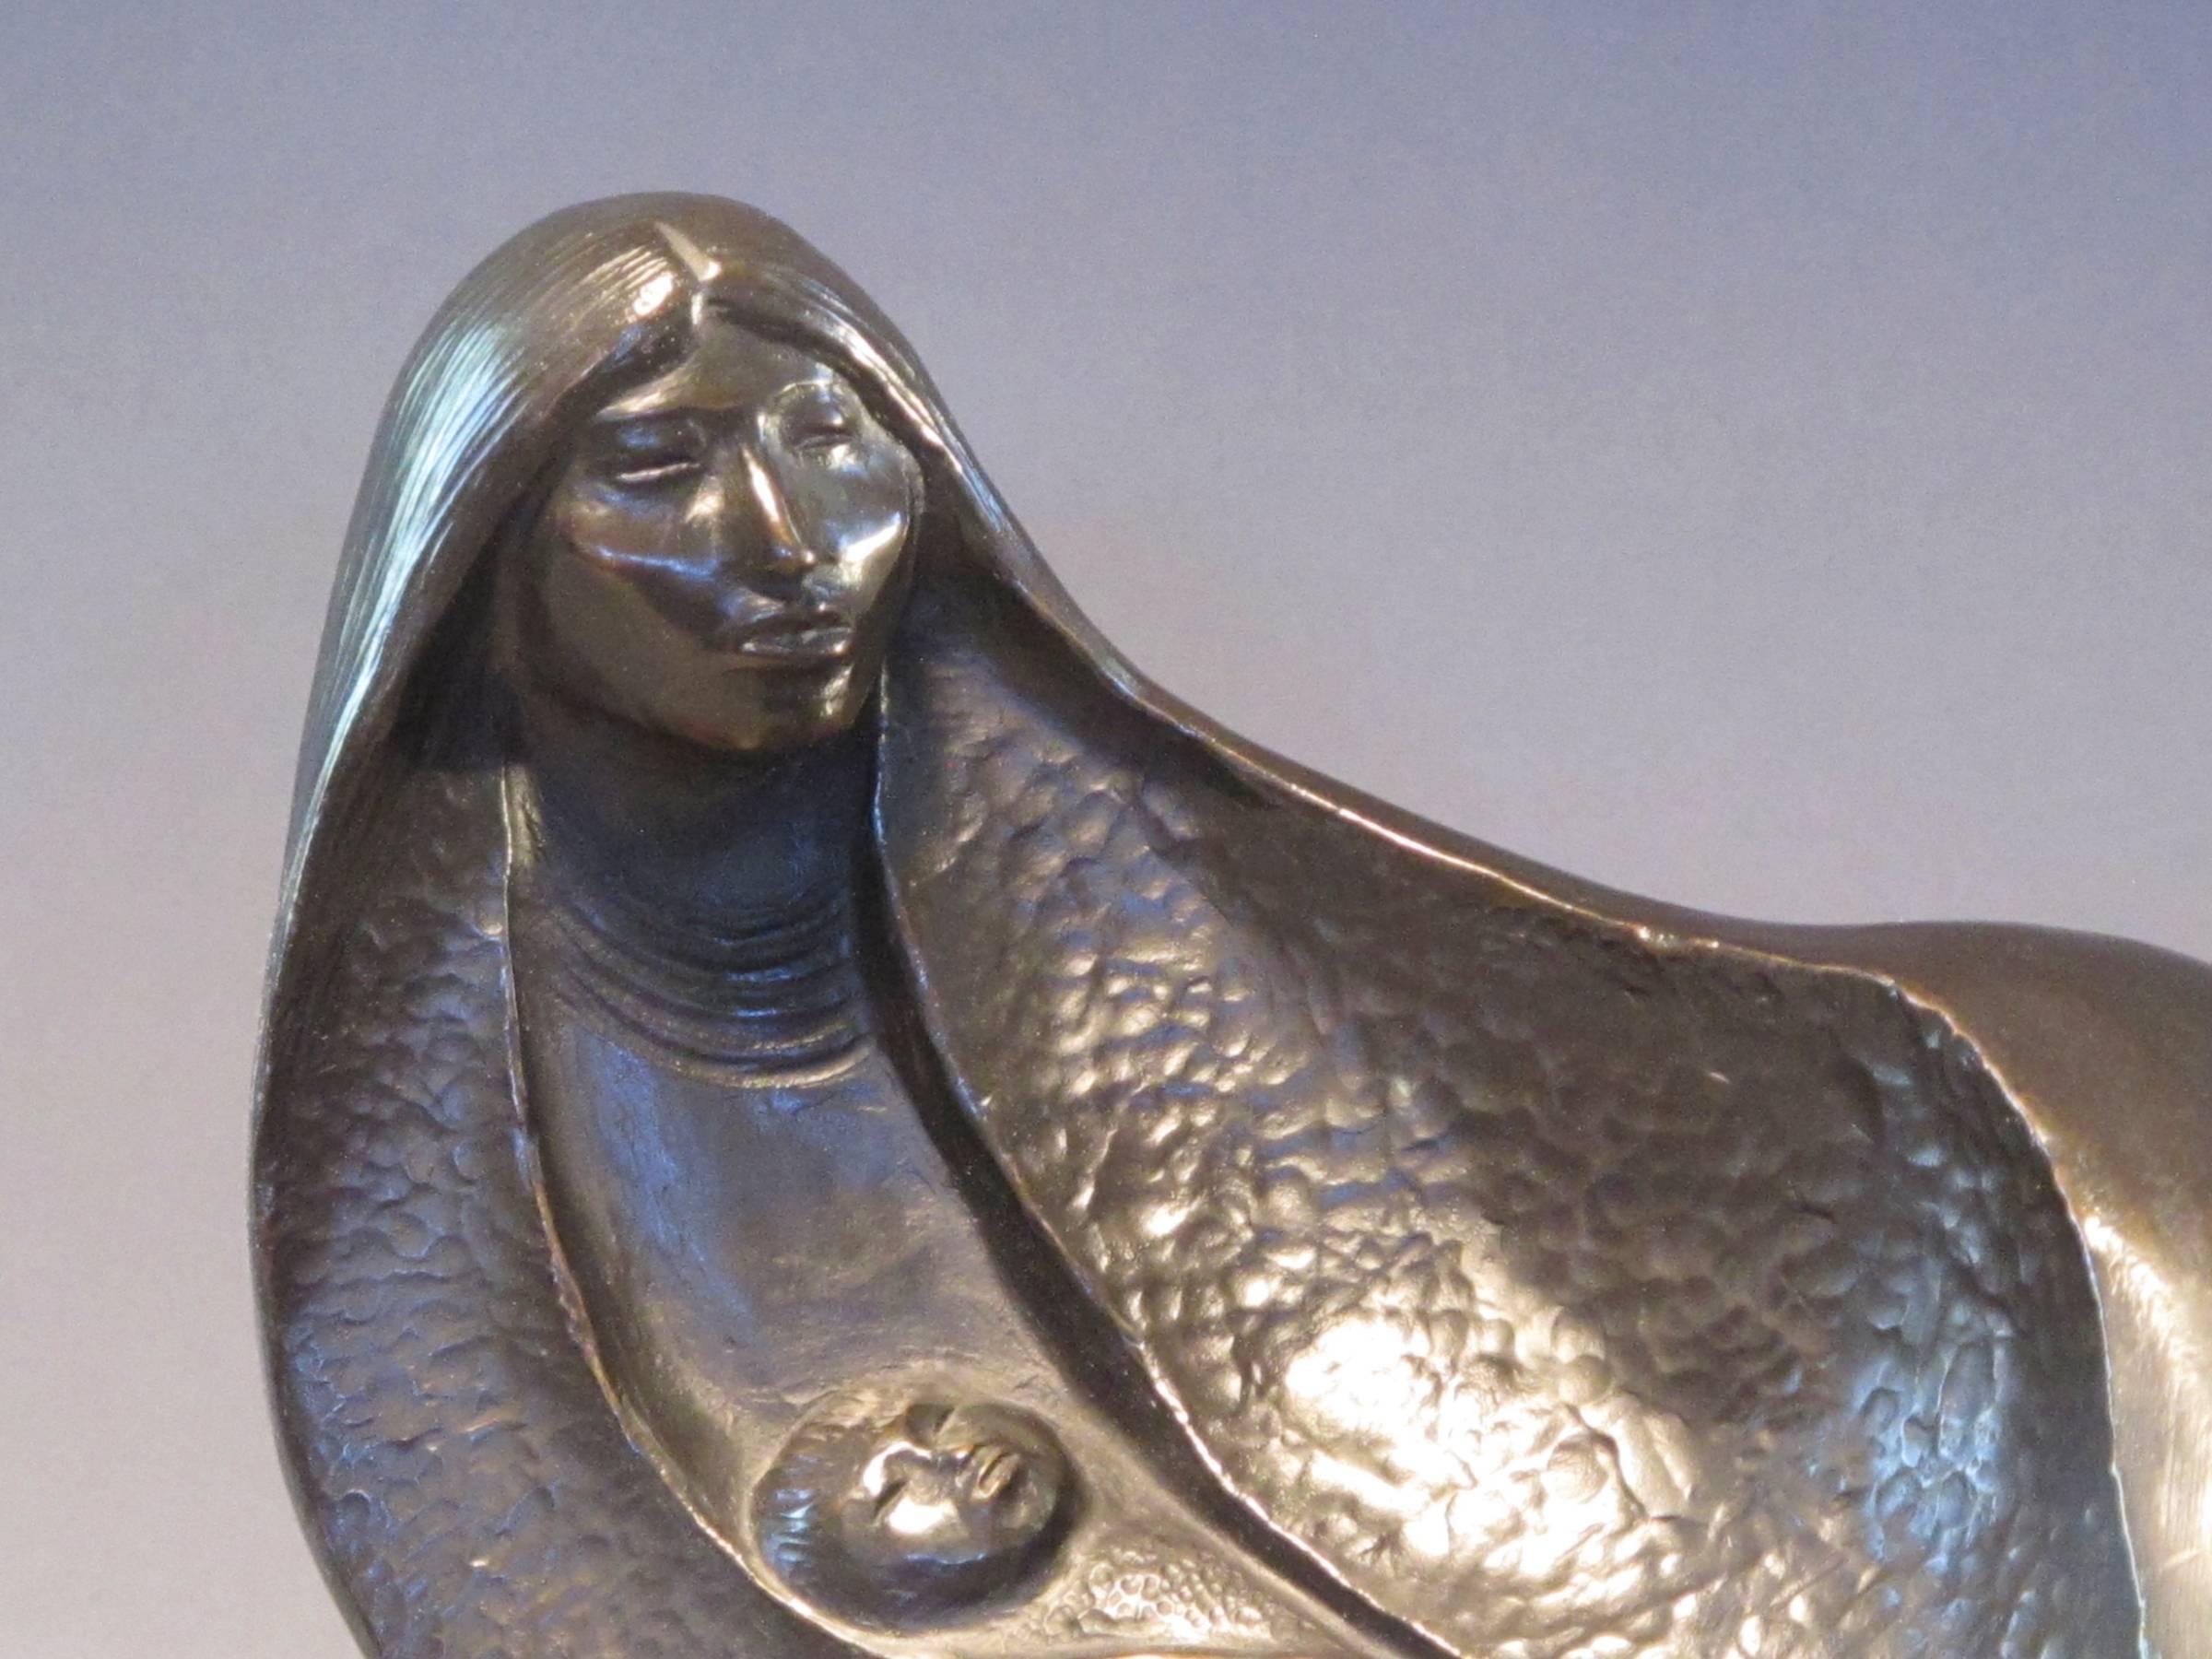 Afternoon Rest, bronze sculpture, reclining Native American woman, limited  - Gold Figurative Sculpture by Allan Houser